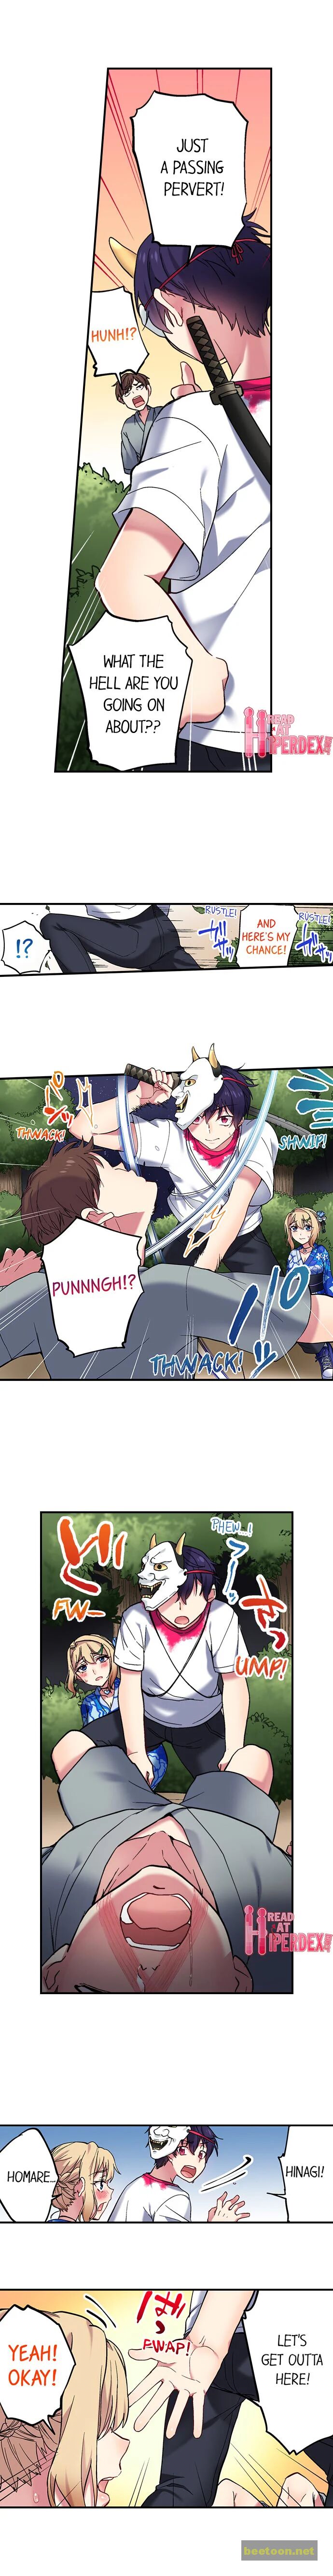 I Can See The Number Of Times People Orgasm Chapter 88 - ManhwaFull.net